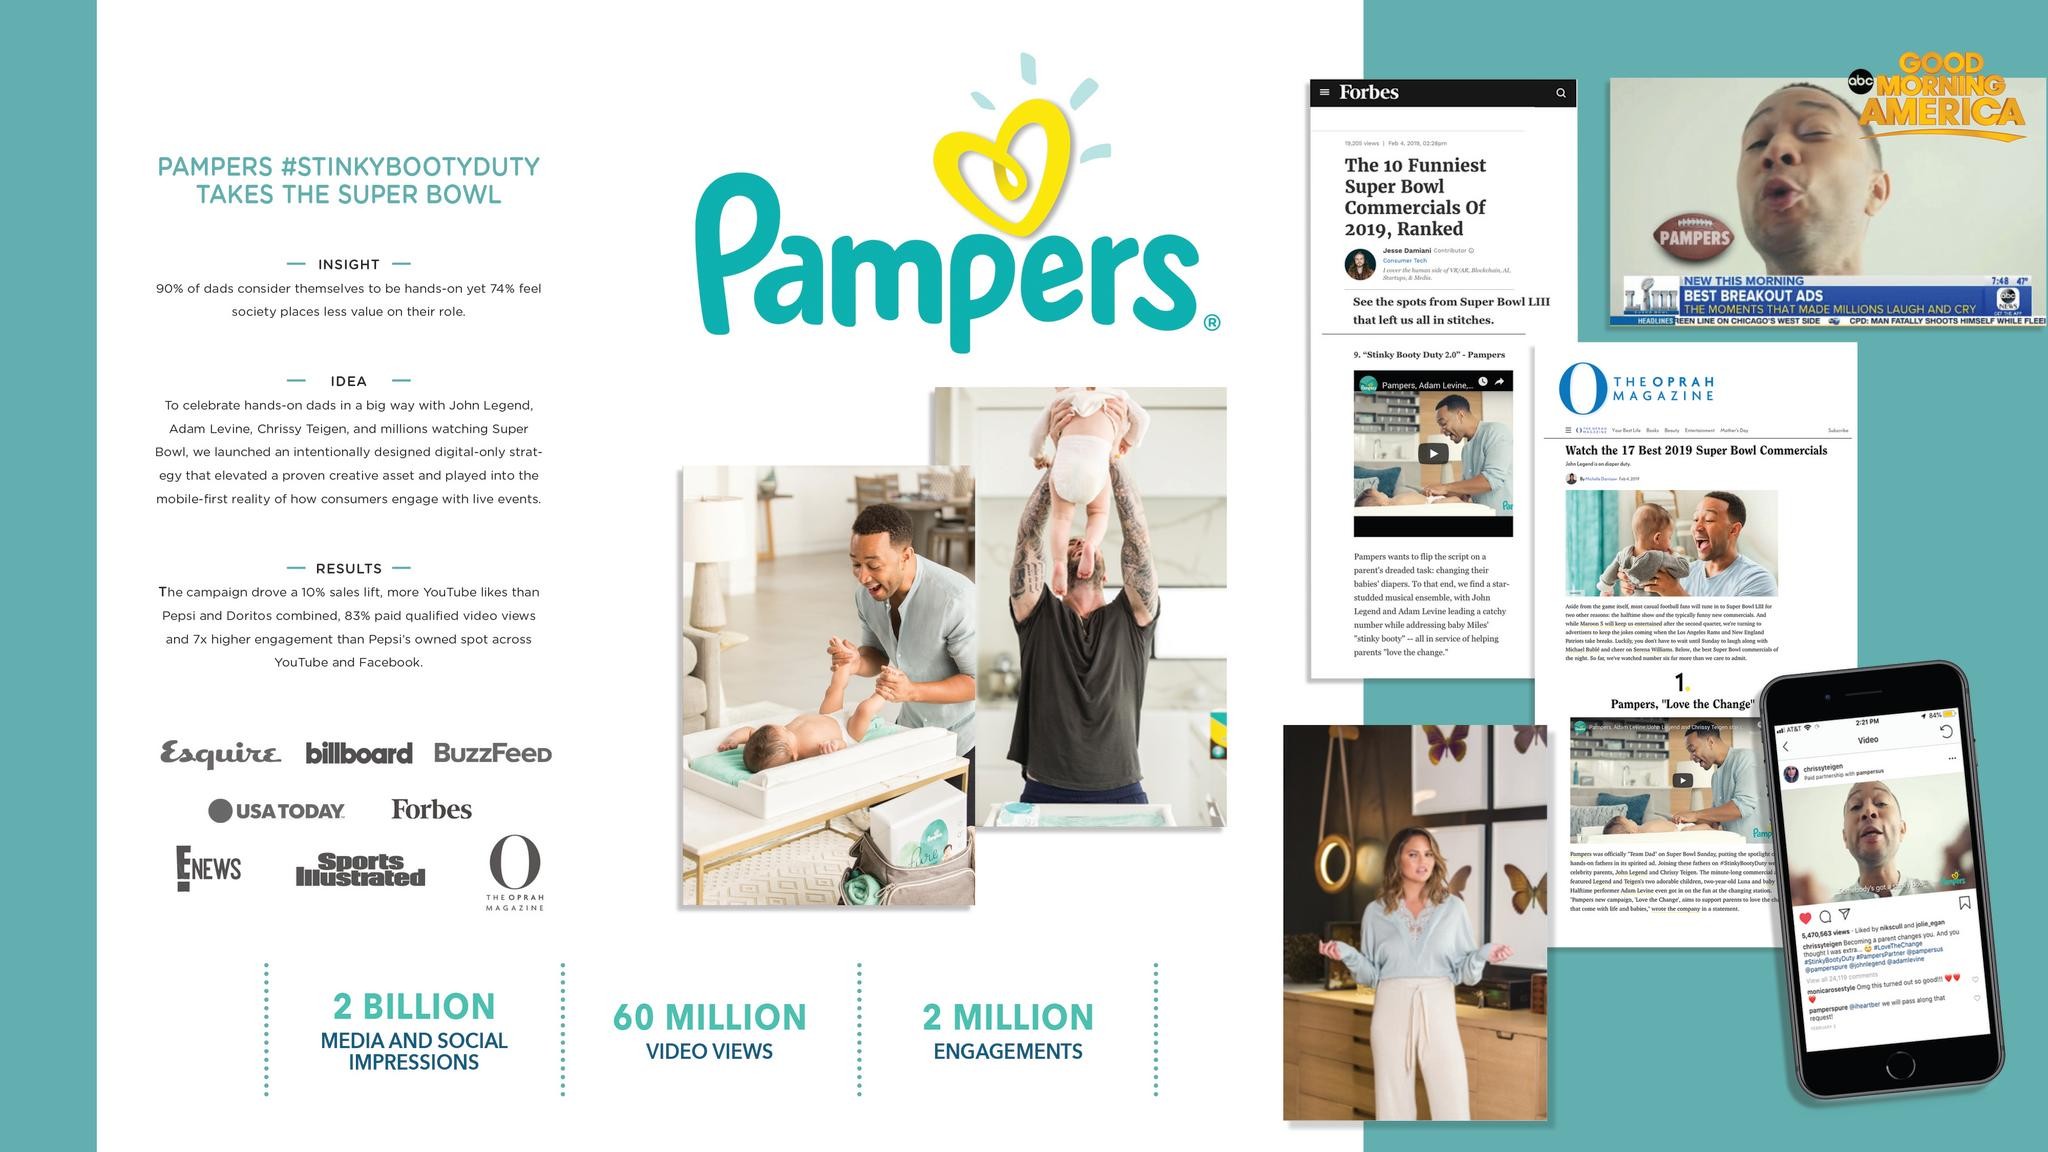 Pampers #Stinkybootyduty Takes the Super Bowl